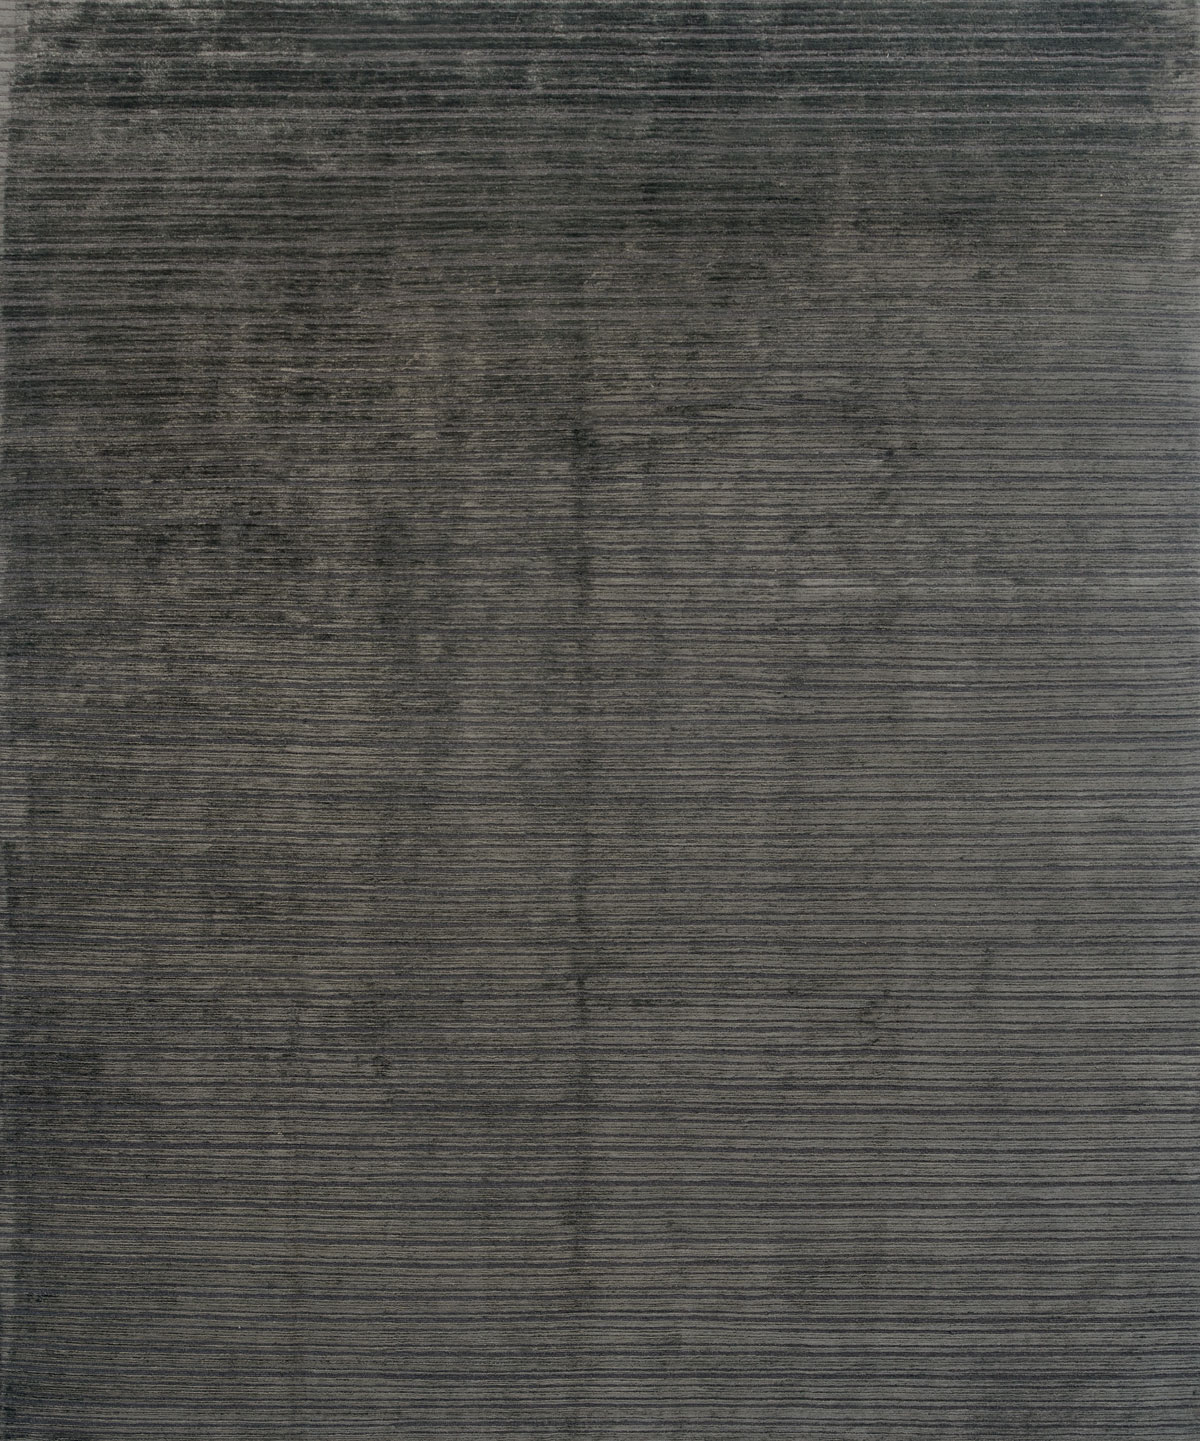 Eccelso Antracite Handknotted Rug ☞ Size: 250 x 300 cm